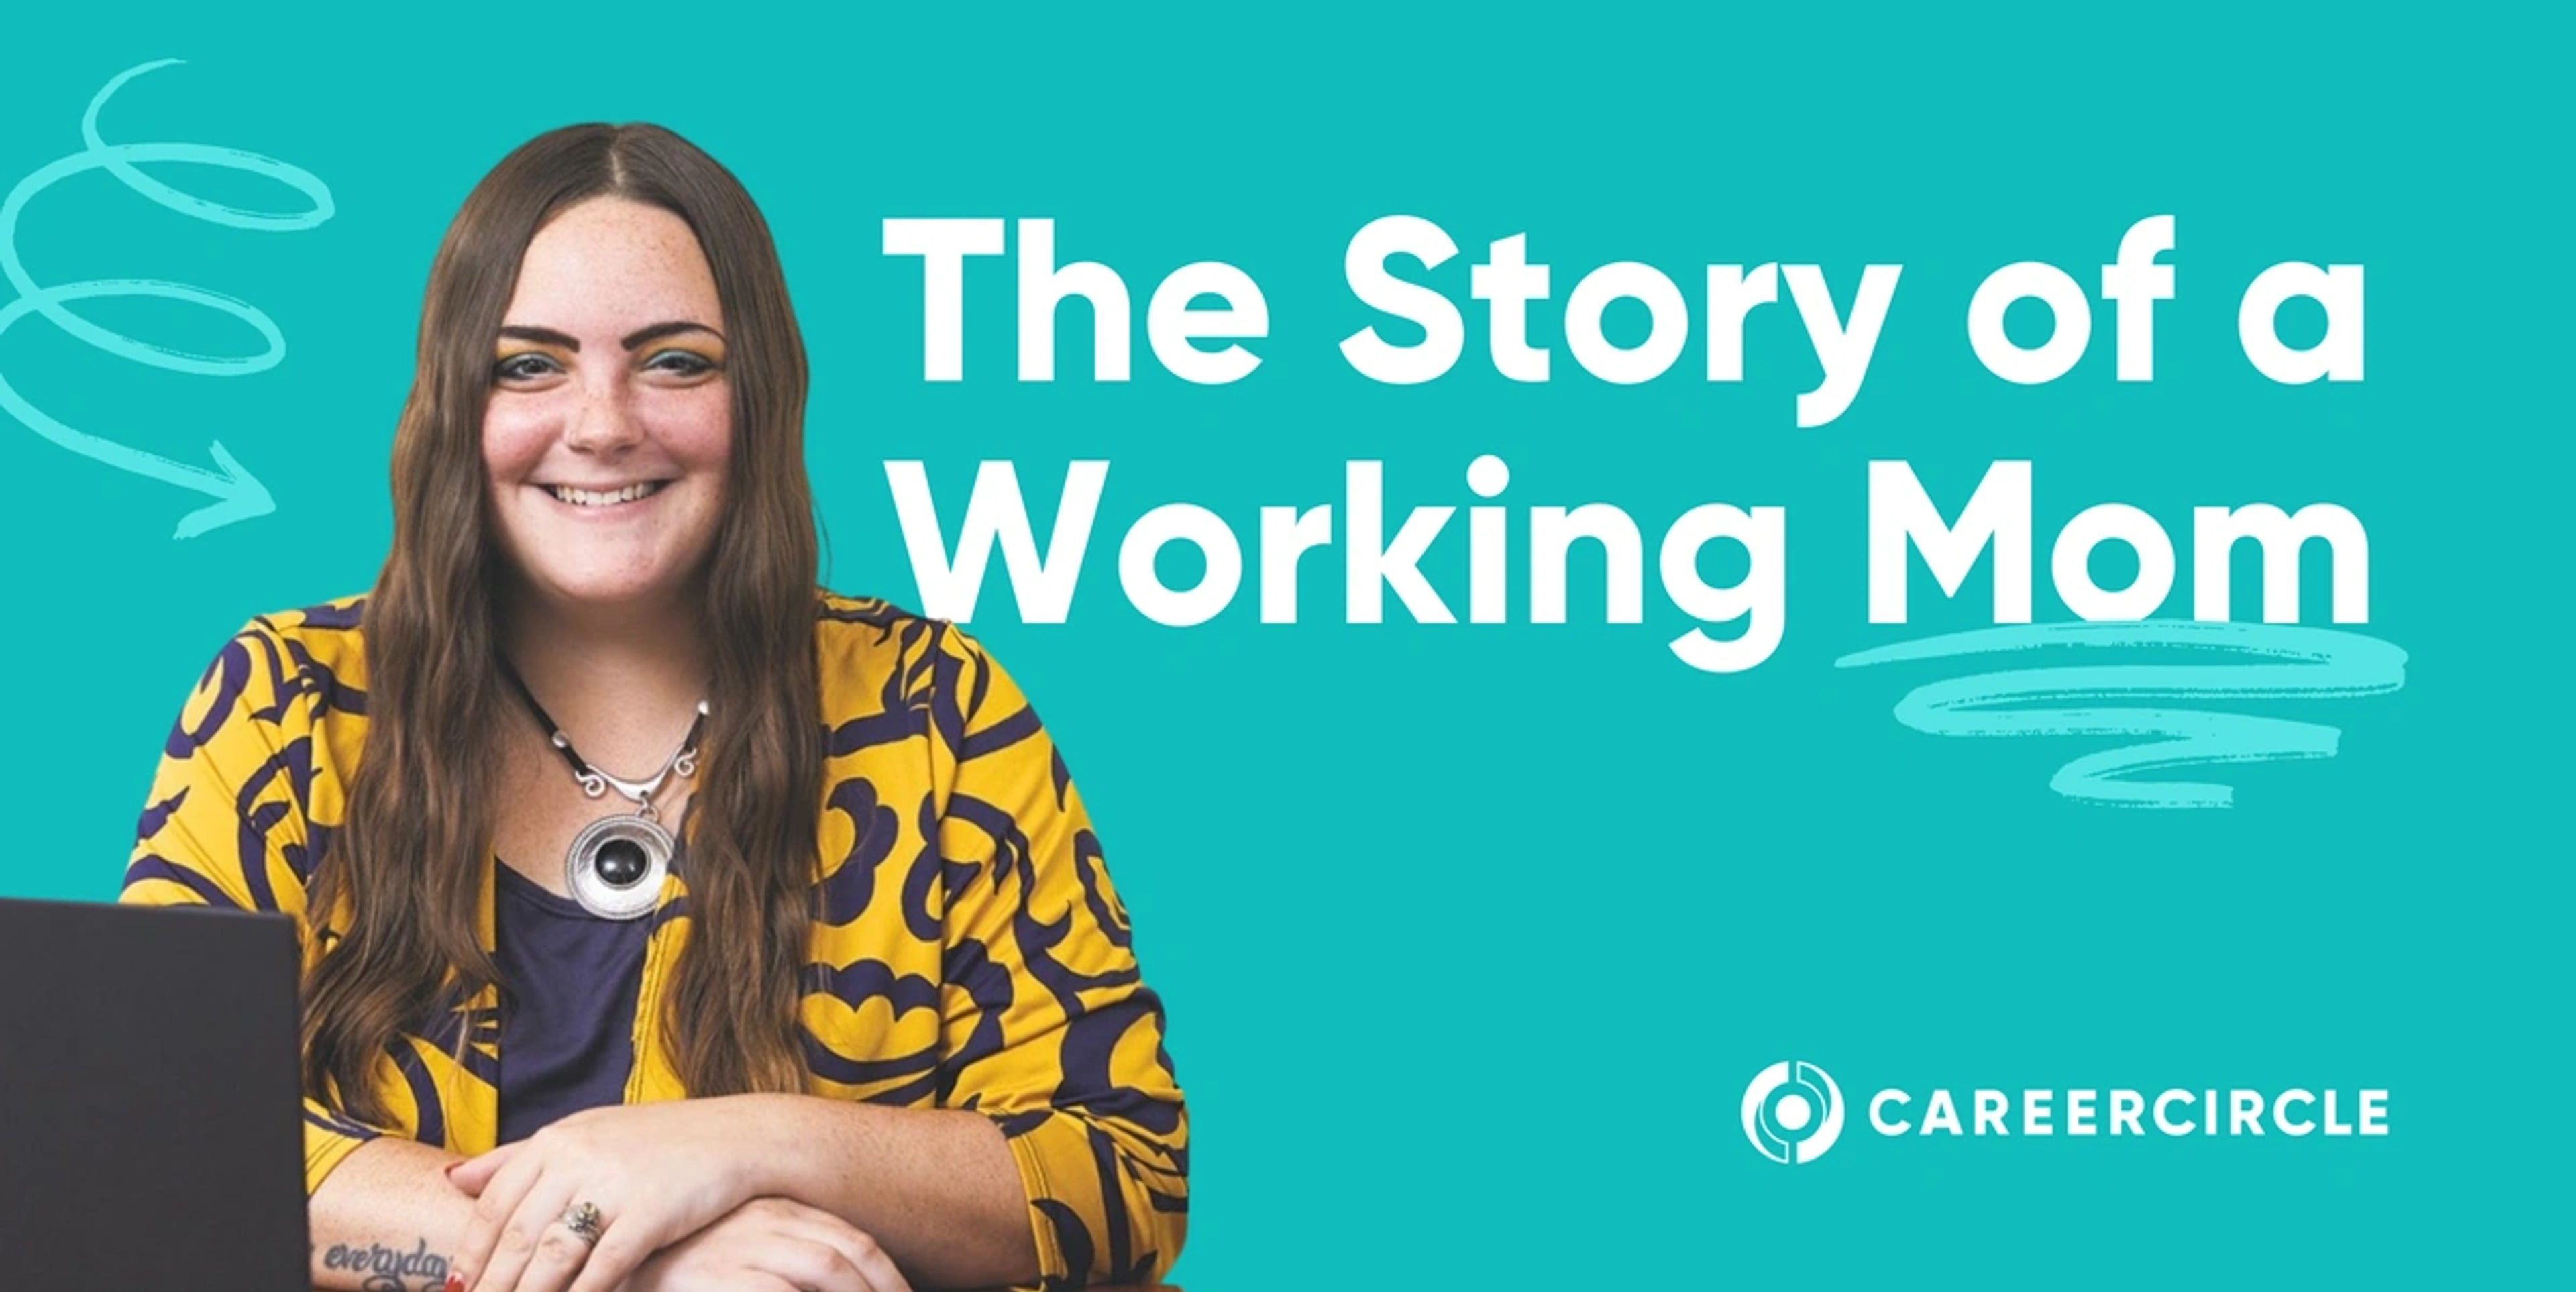 Writing Your Own Story: A CareerCircle Career Journey